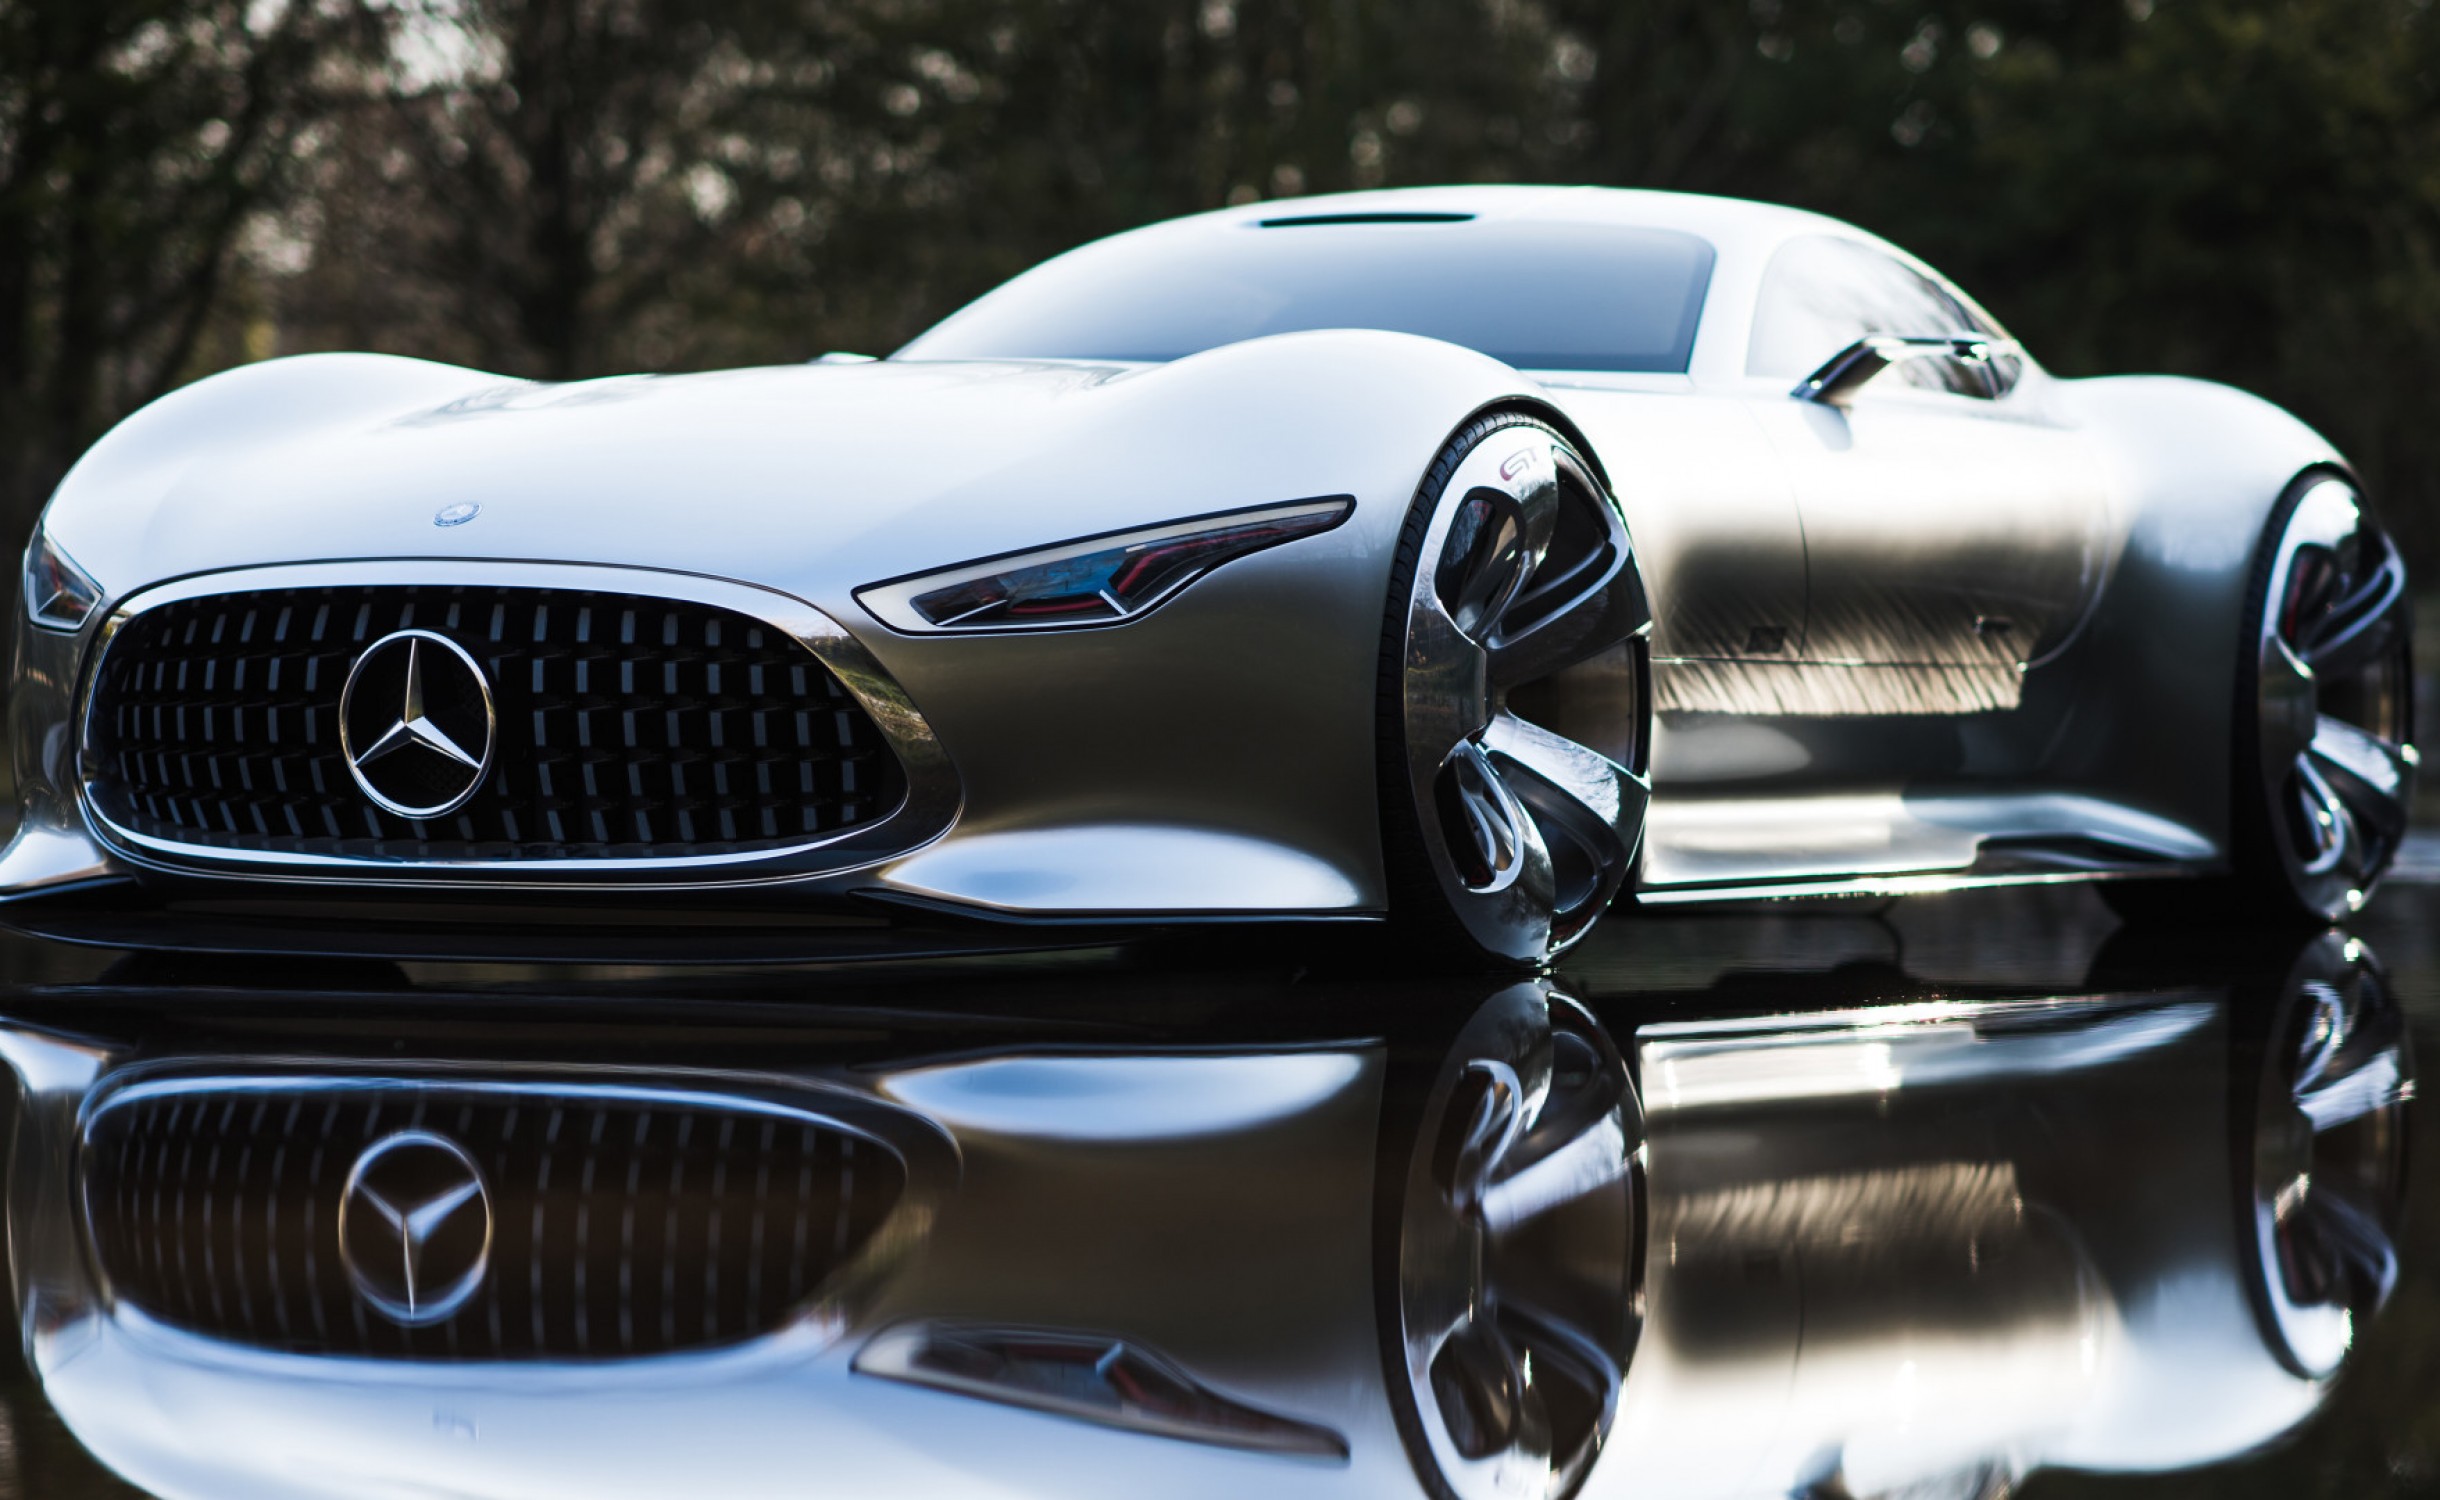 We want to see AMG Vision GT on the roads in Monaco 